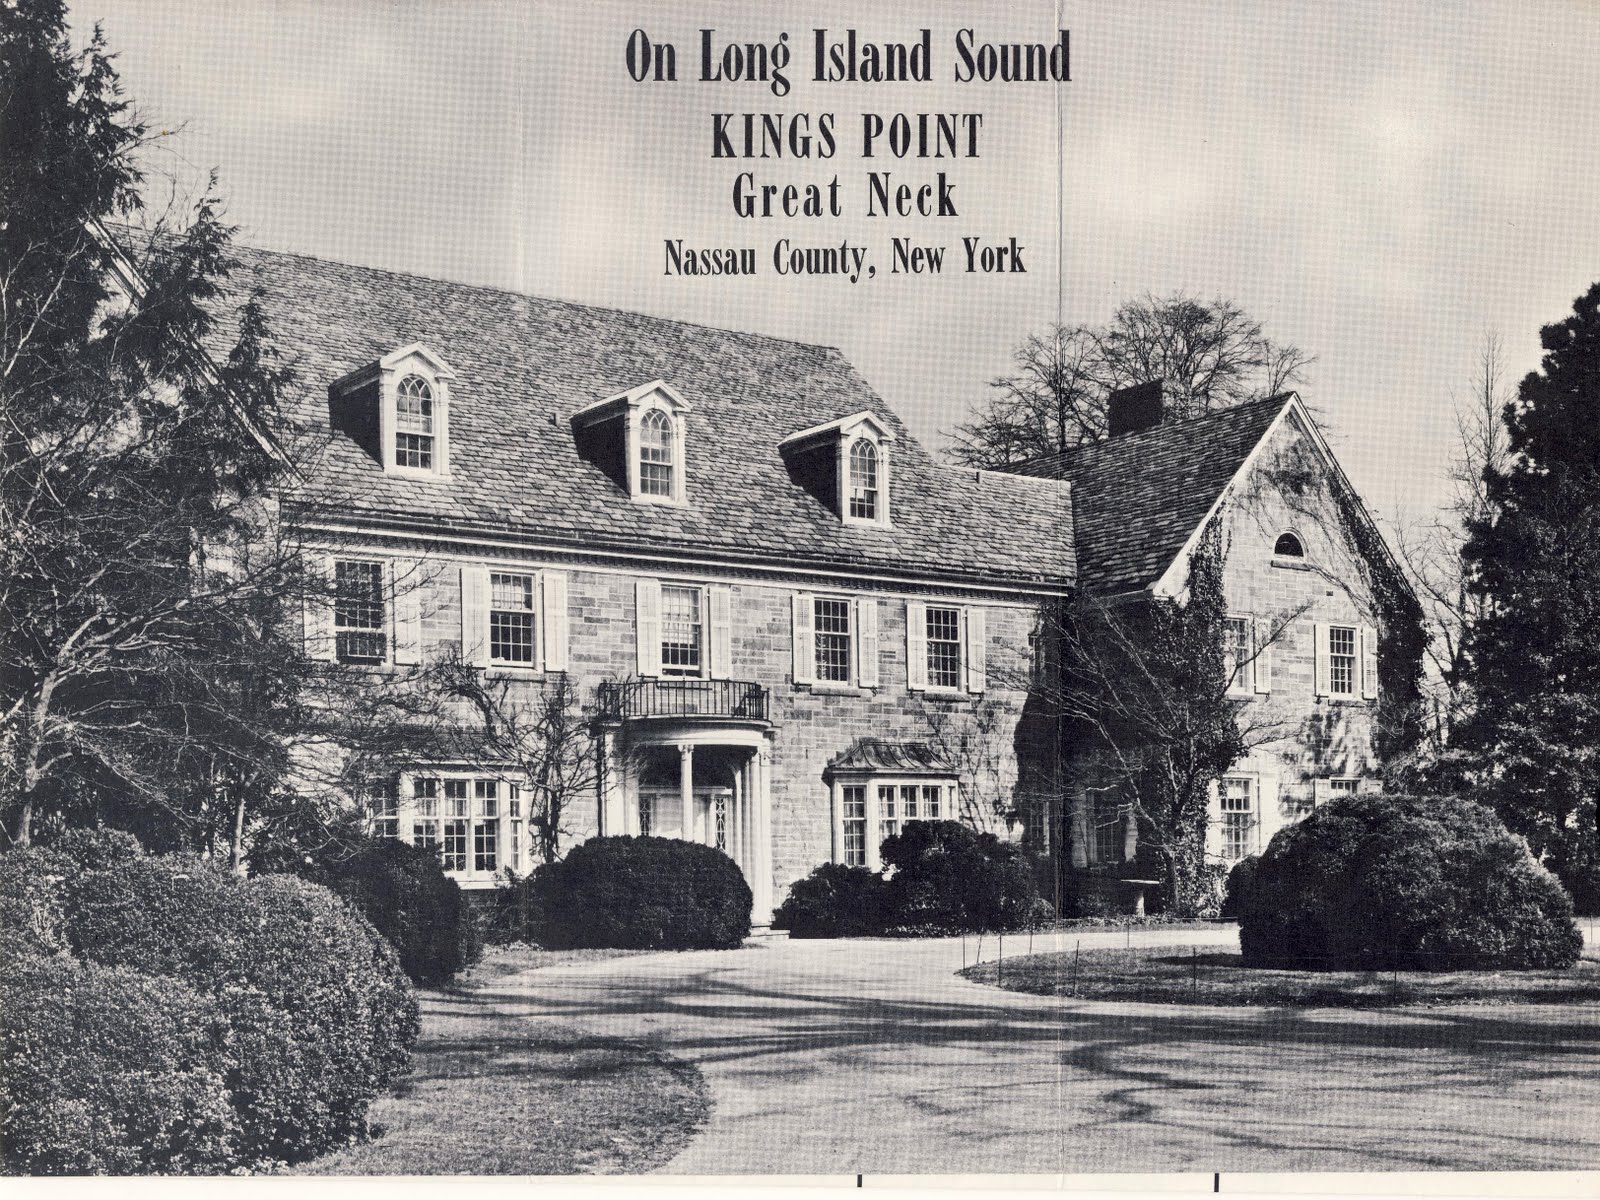 Old Long Island: When The Hannibal C. Ford Residence Was For Sale